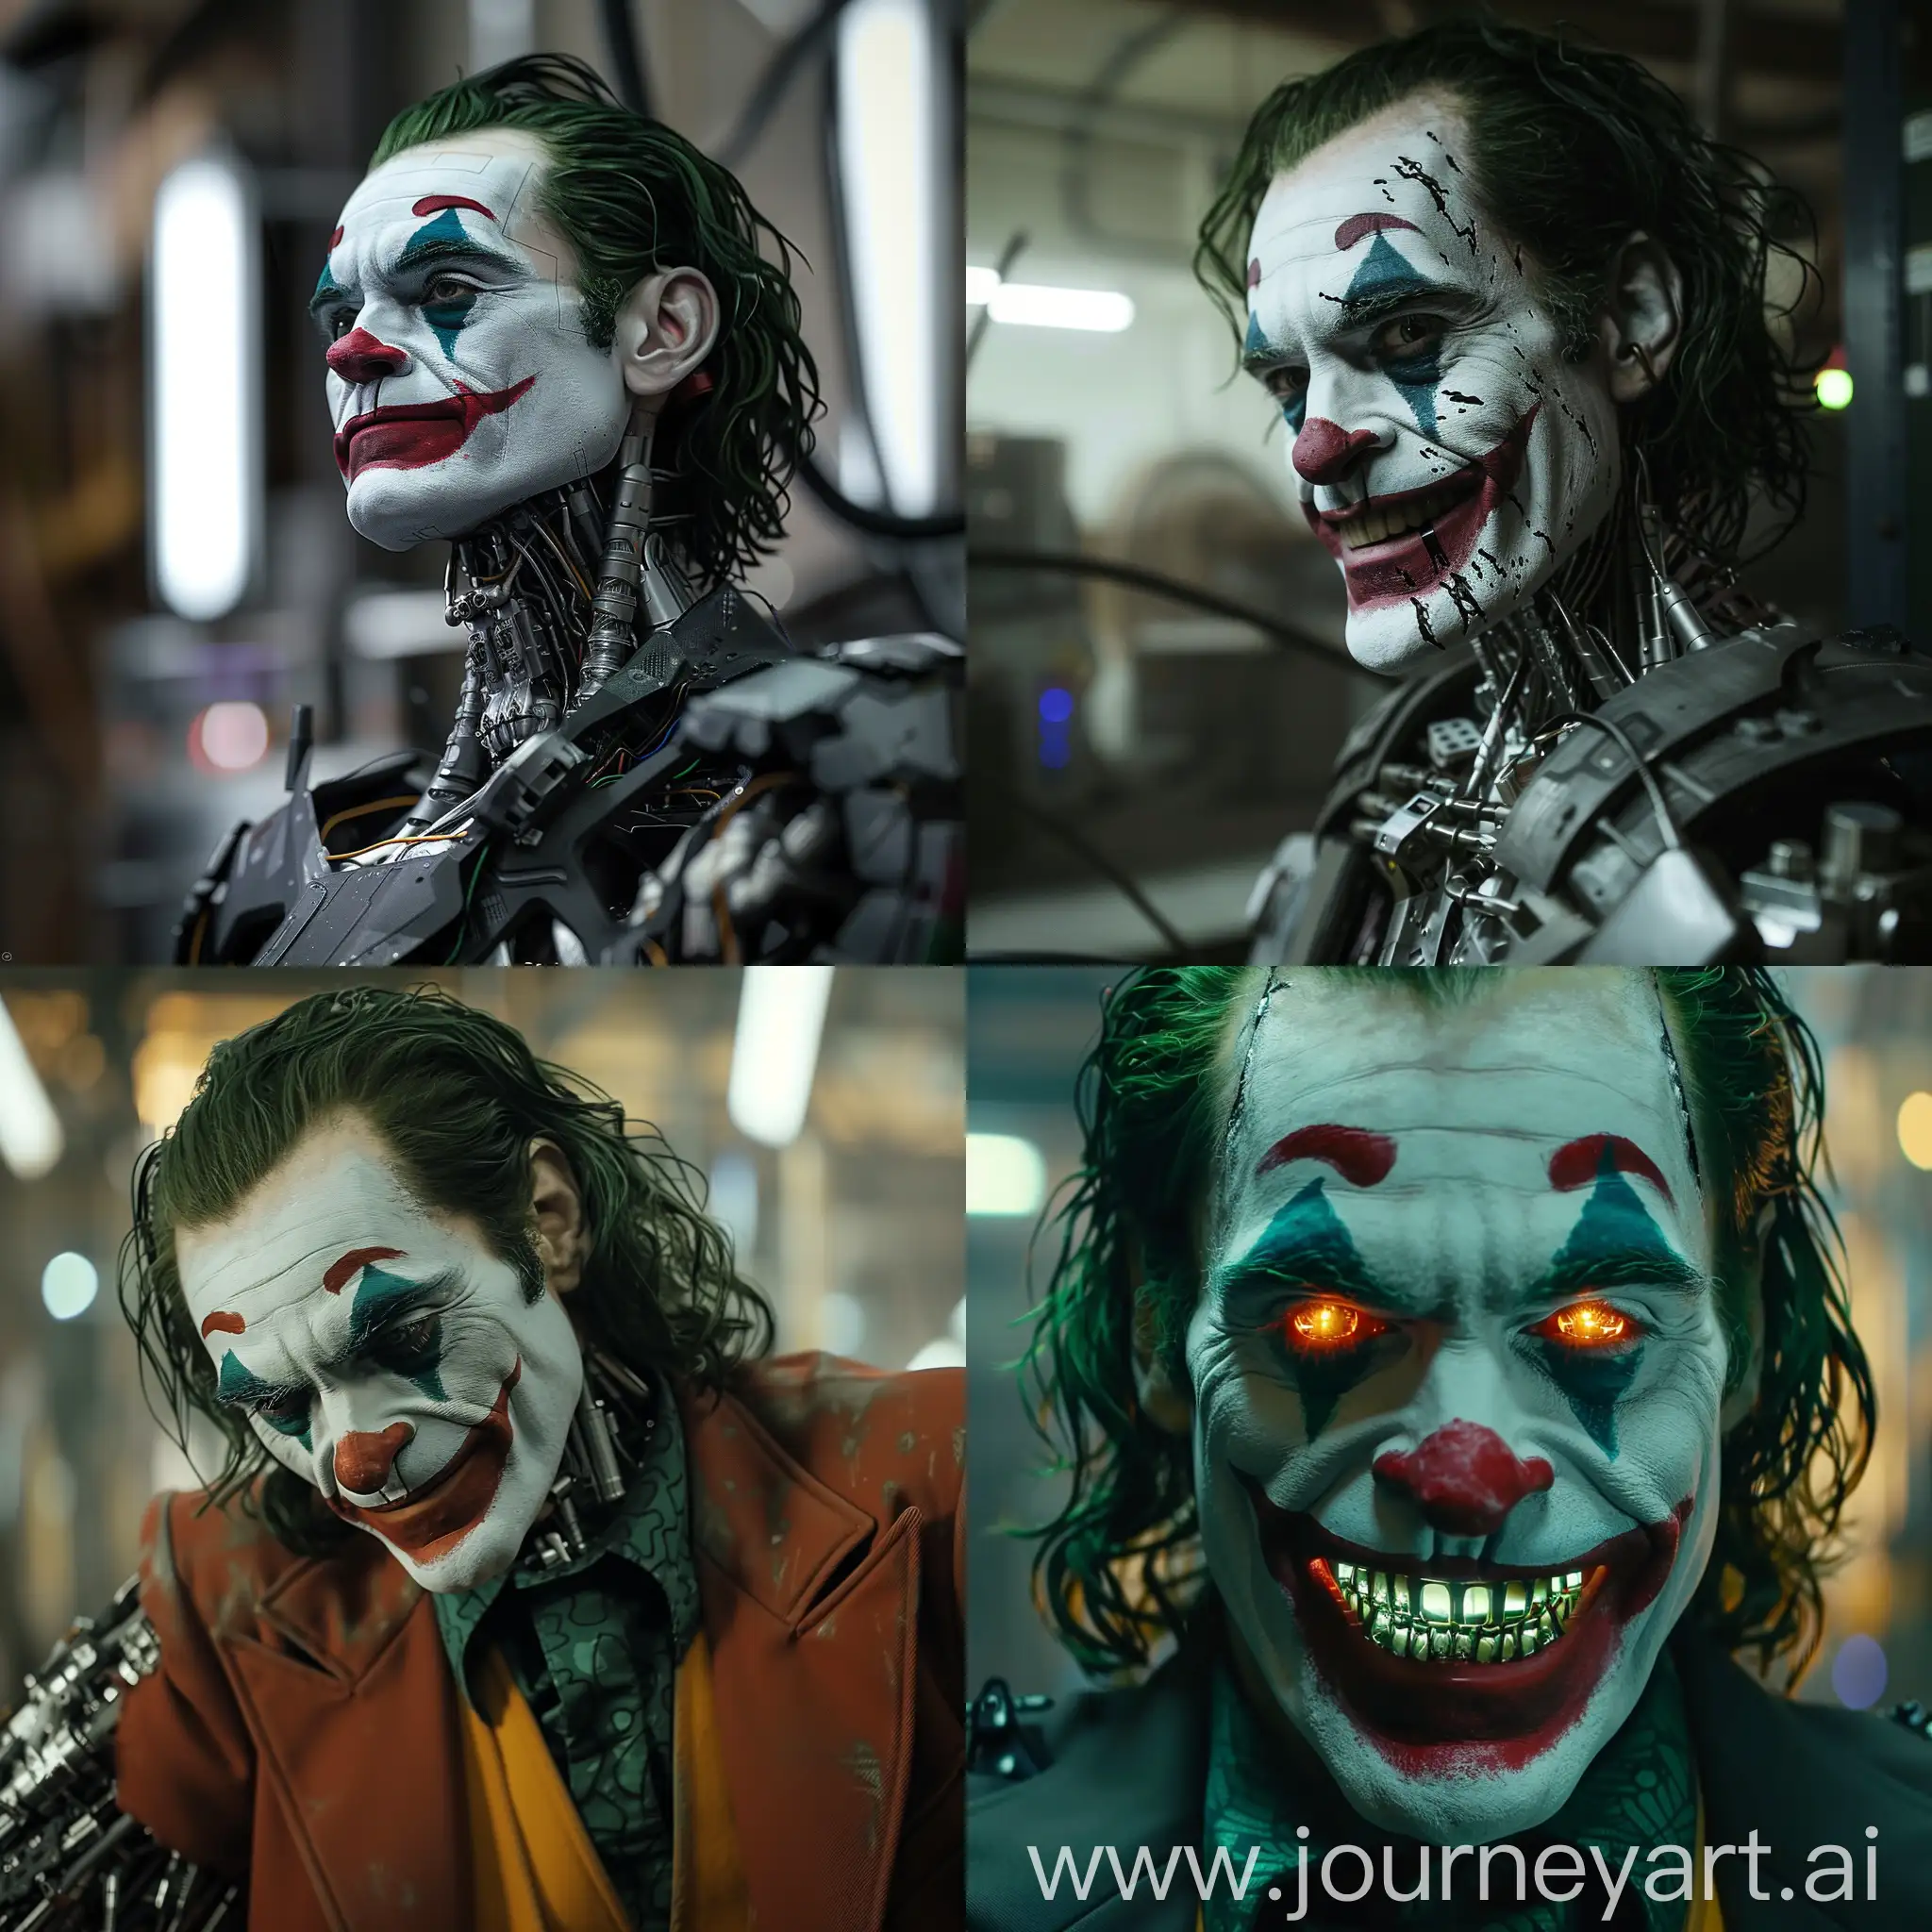 The joker becomes a synthetic human
